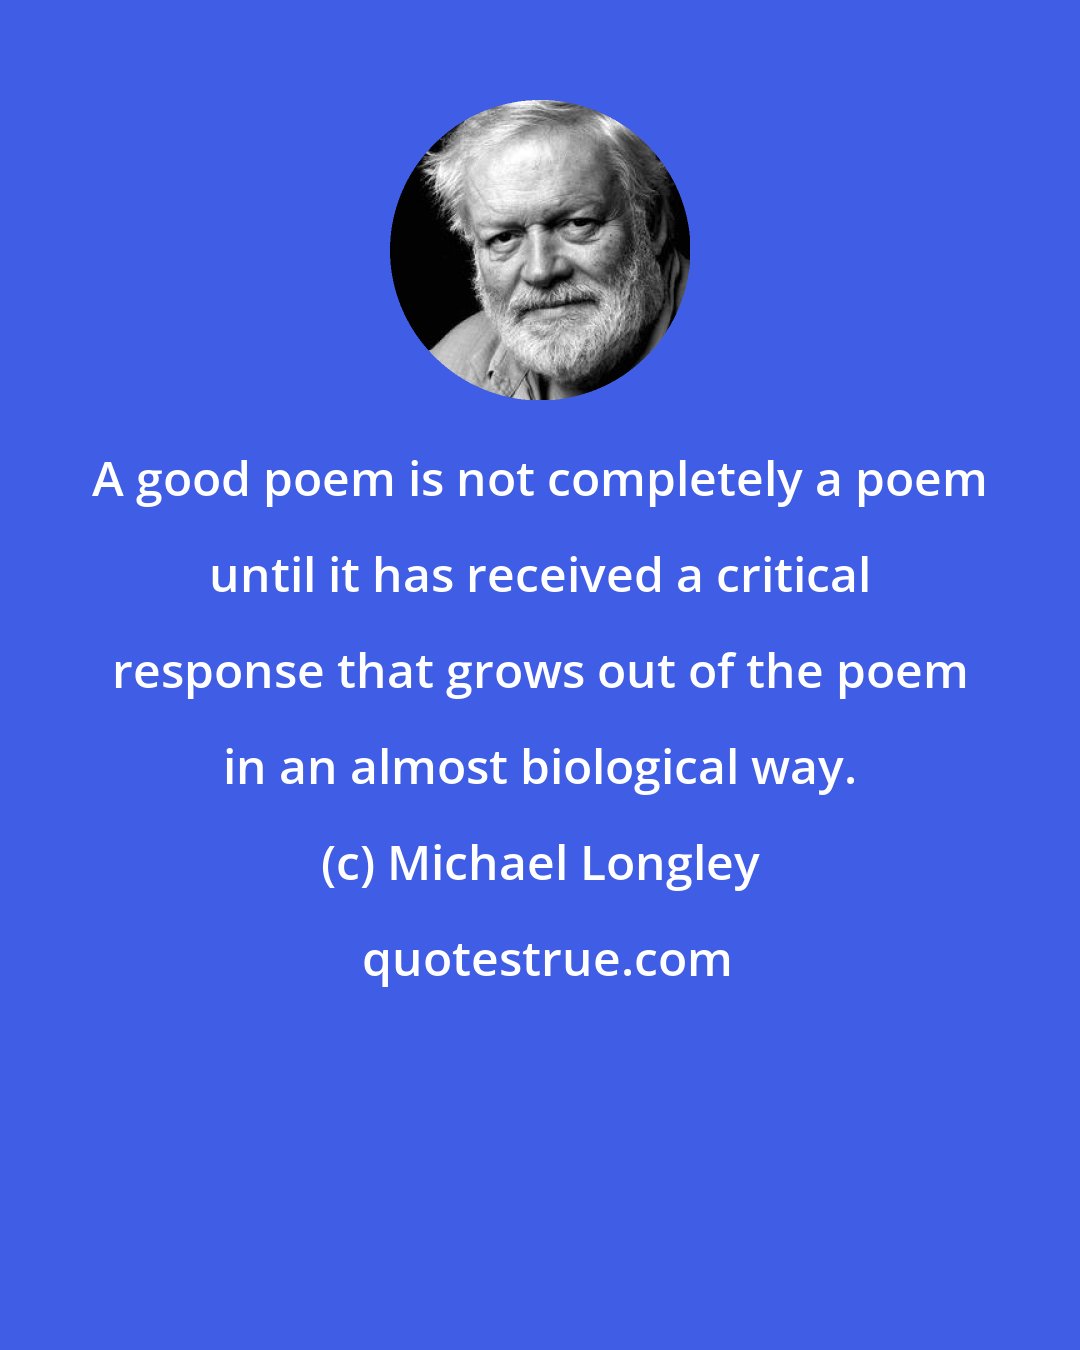 Michael Longley: A good poem is not completely a poem until it has received a critical response that grows out of the poem in an almost biological way.